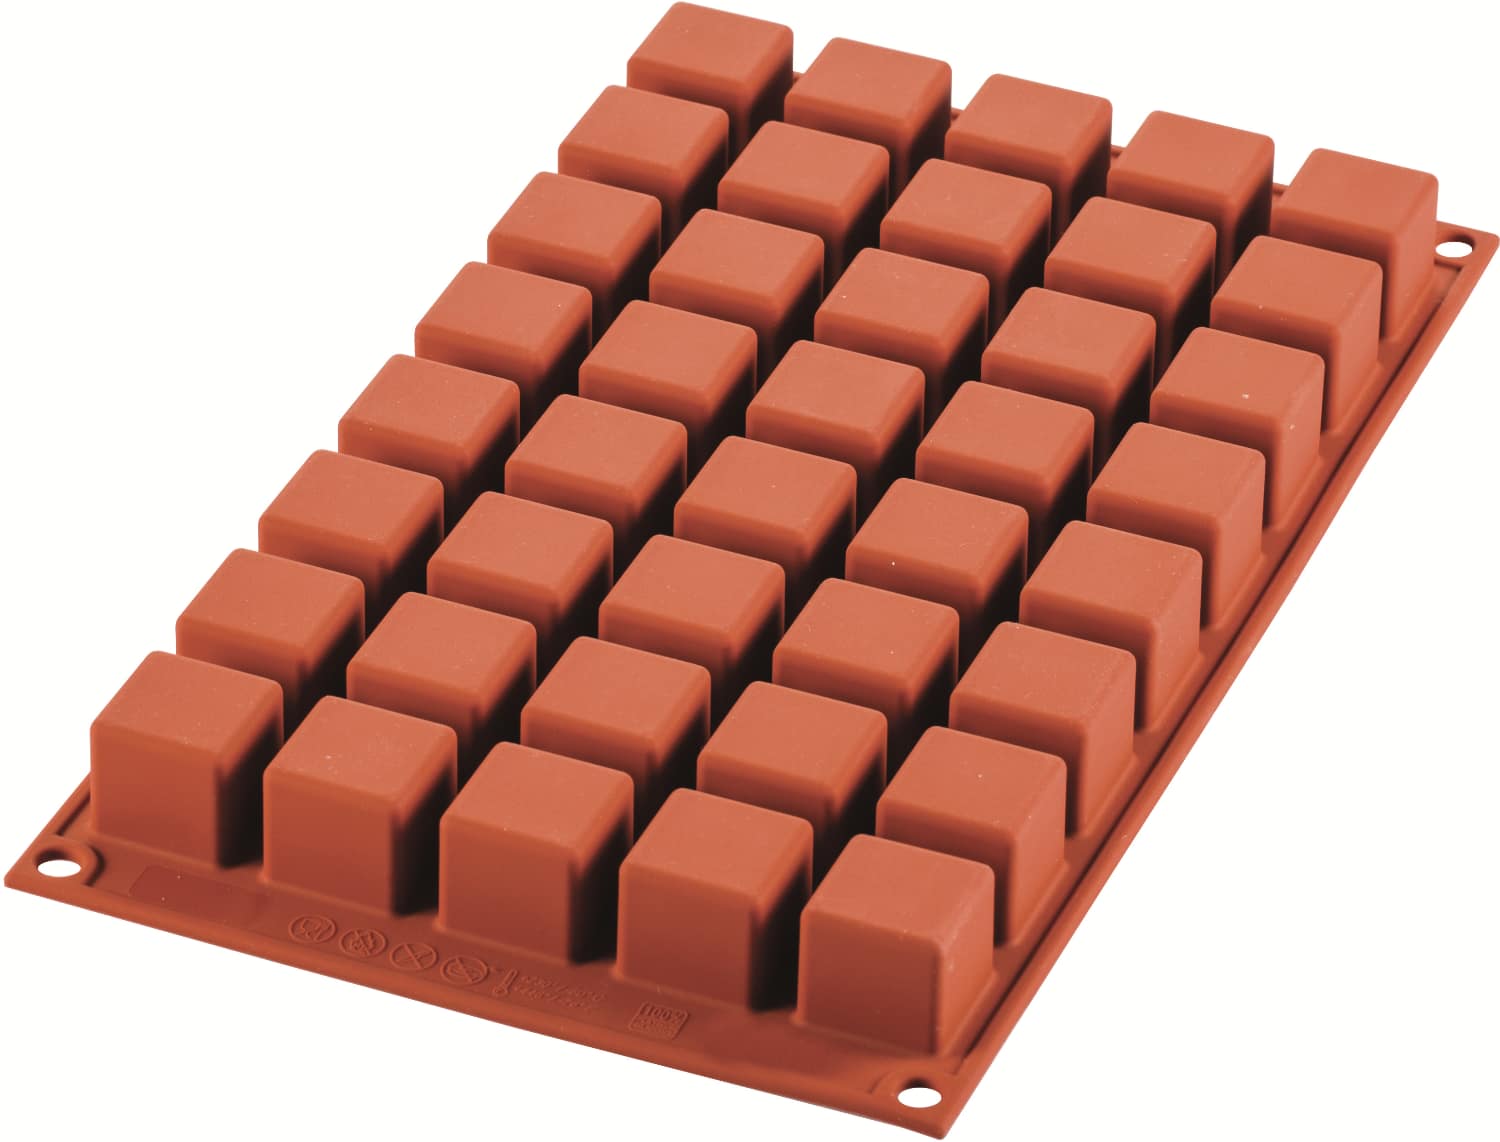 Silicone baking moulds "Cube" 300 x 175 mm